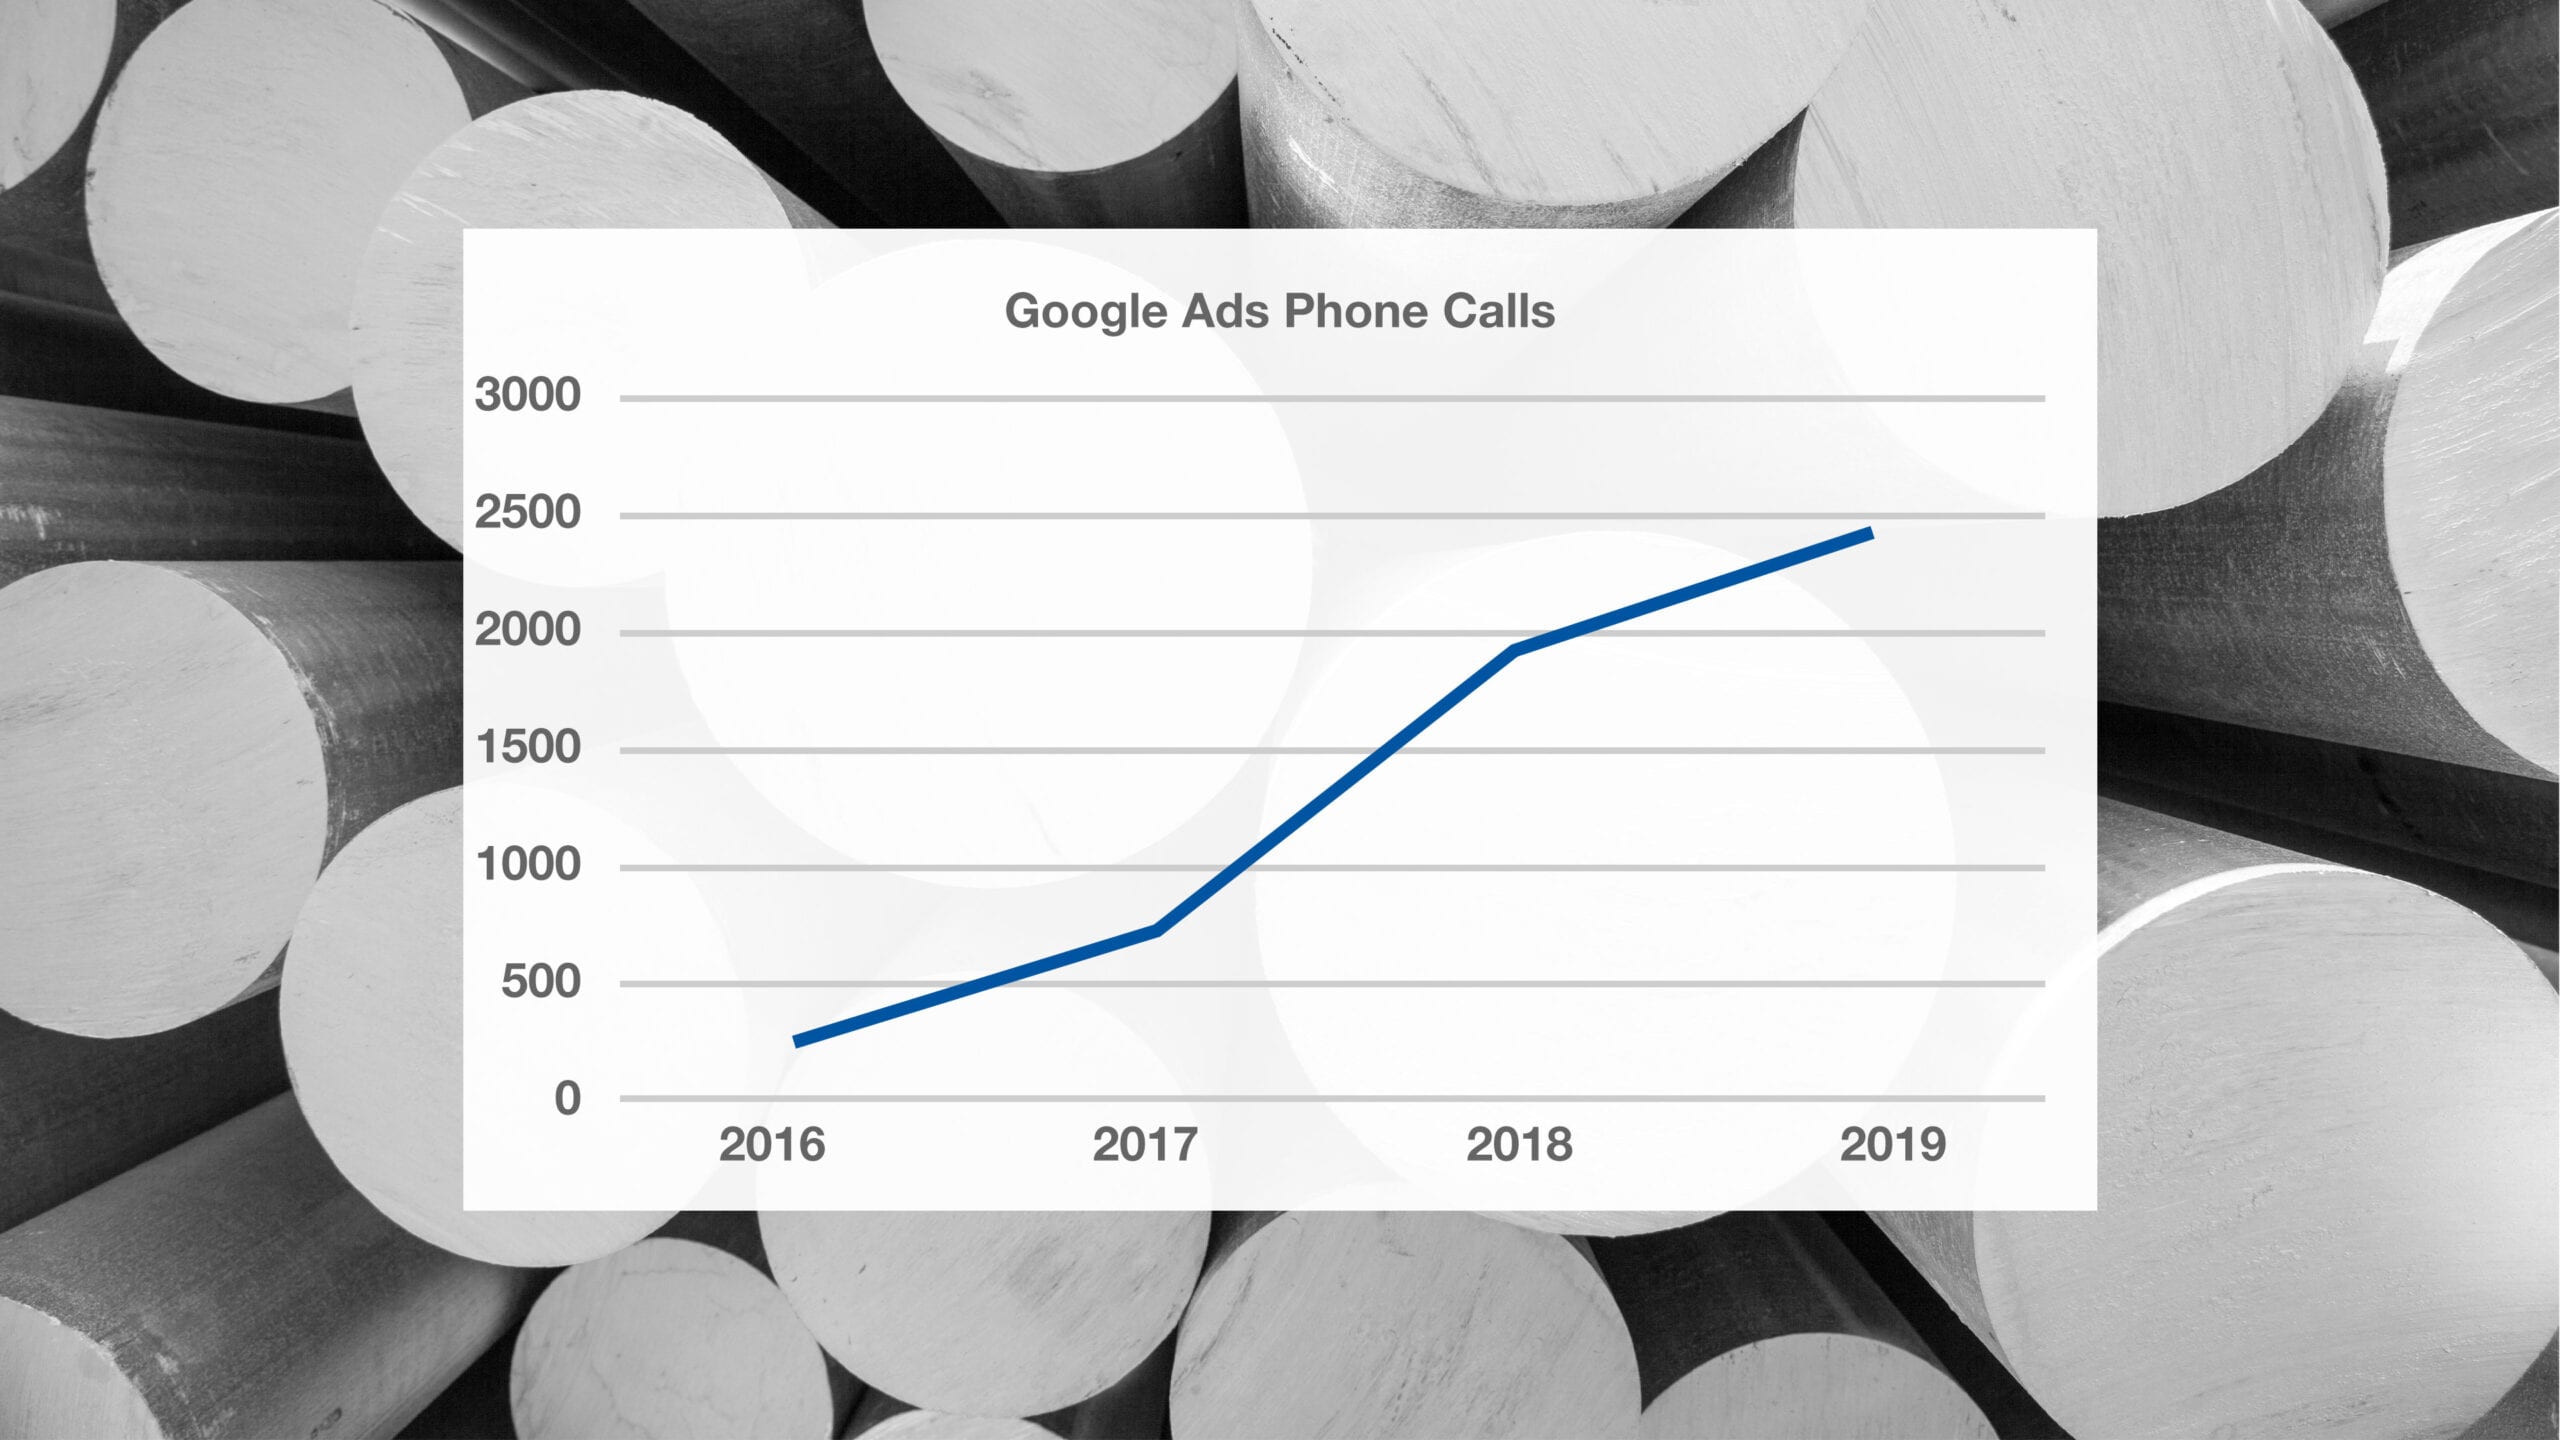 Line chart showing Google Ads Phone Calls going up